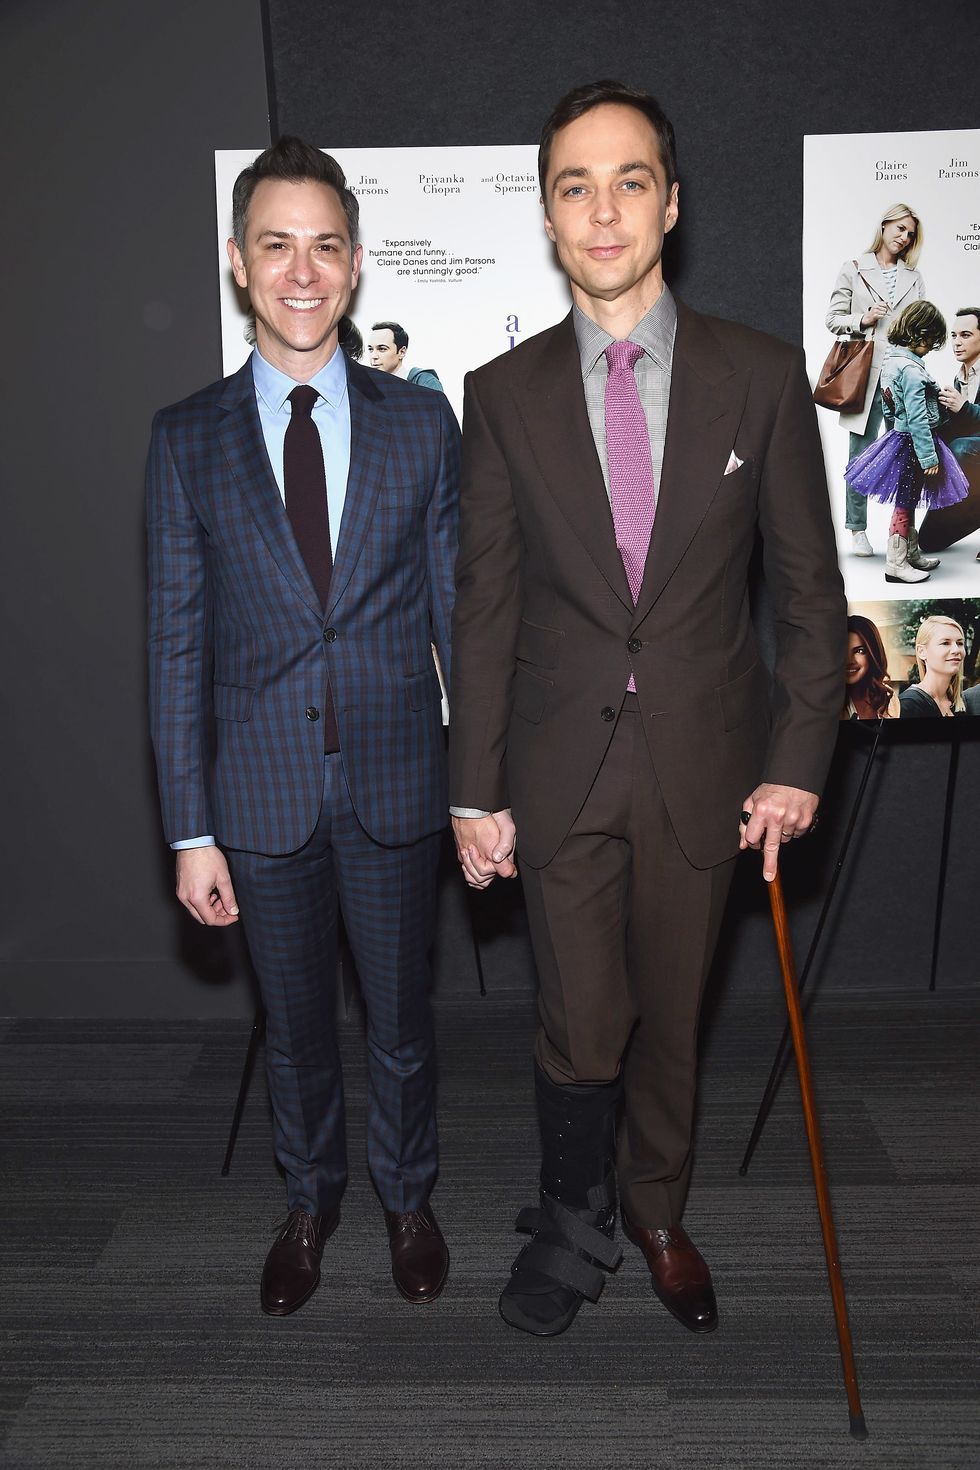 todd spiewak and jim parsons